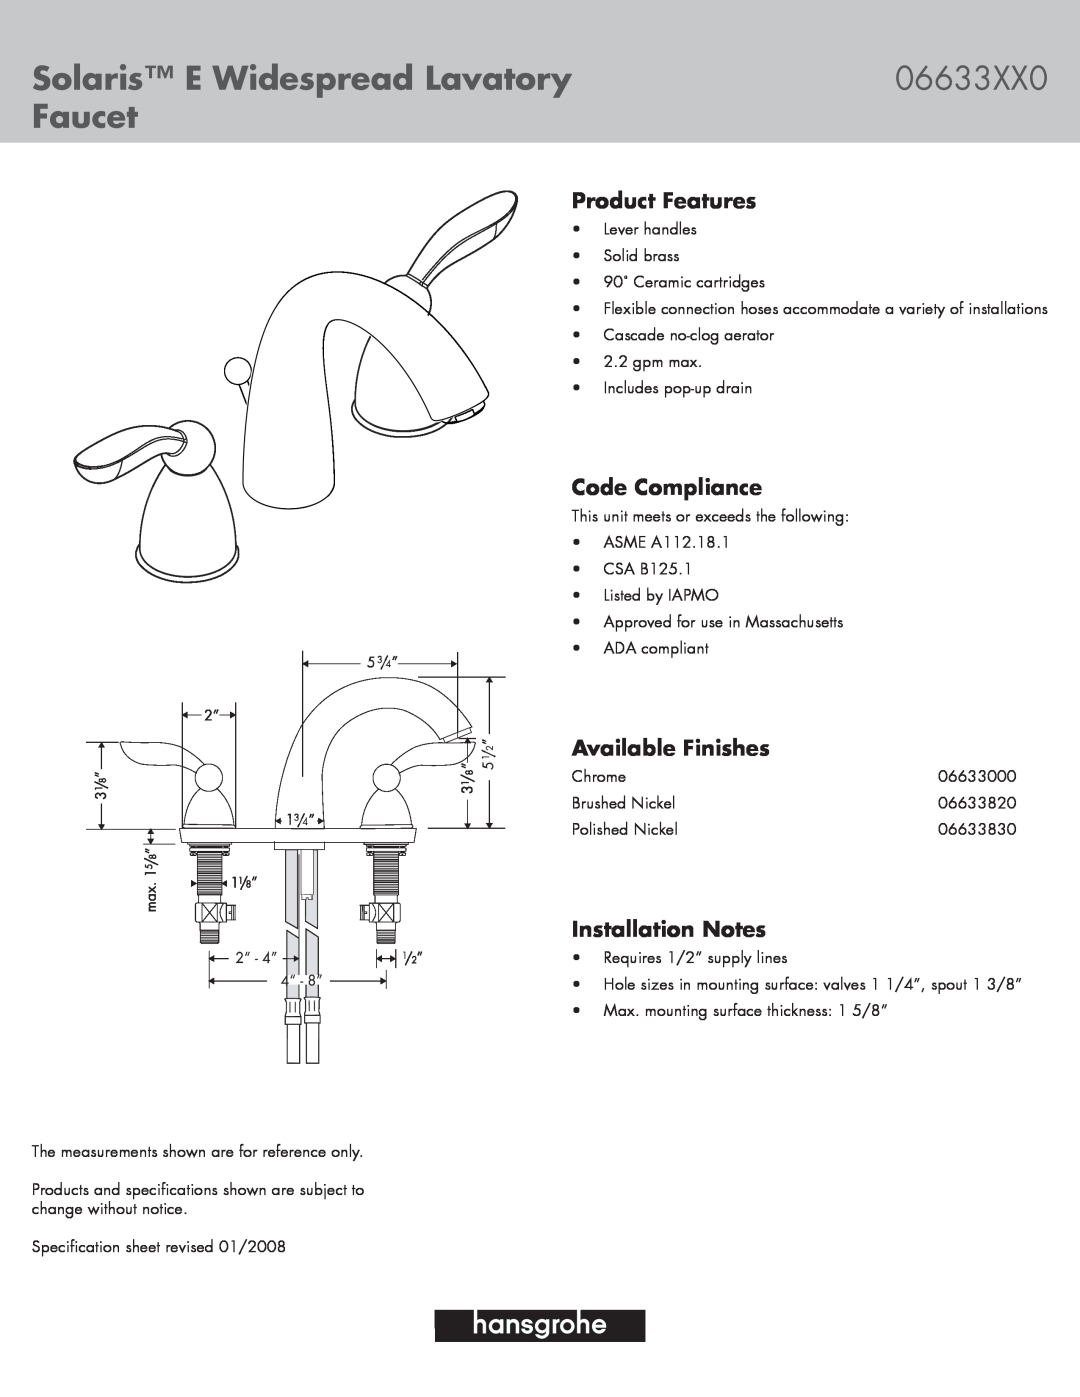 Hans Grohe 06633830 specifications Solaris E Widespread Lavatory, 06633XX0, Faucet, Product Features, Code Compliance 